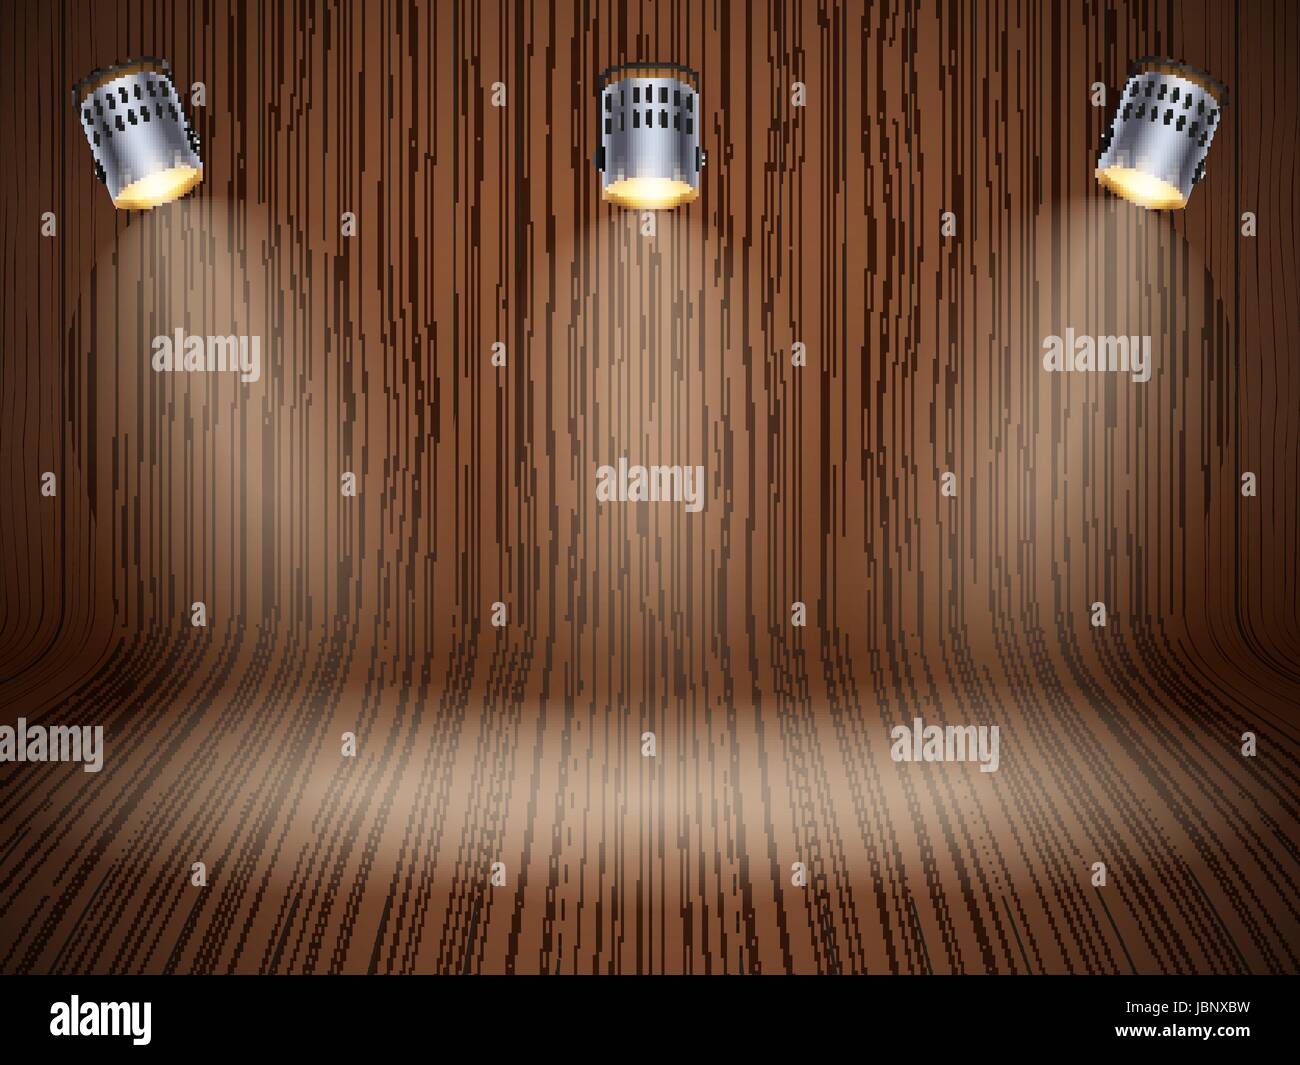 Curved wooden background with spotlights Stock Vector